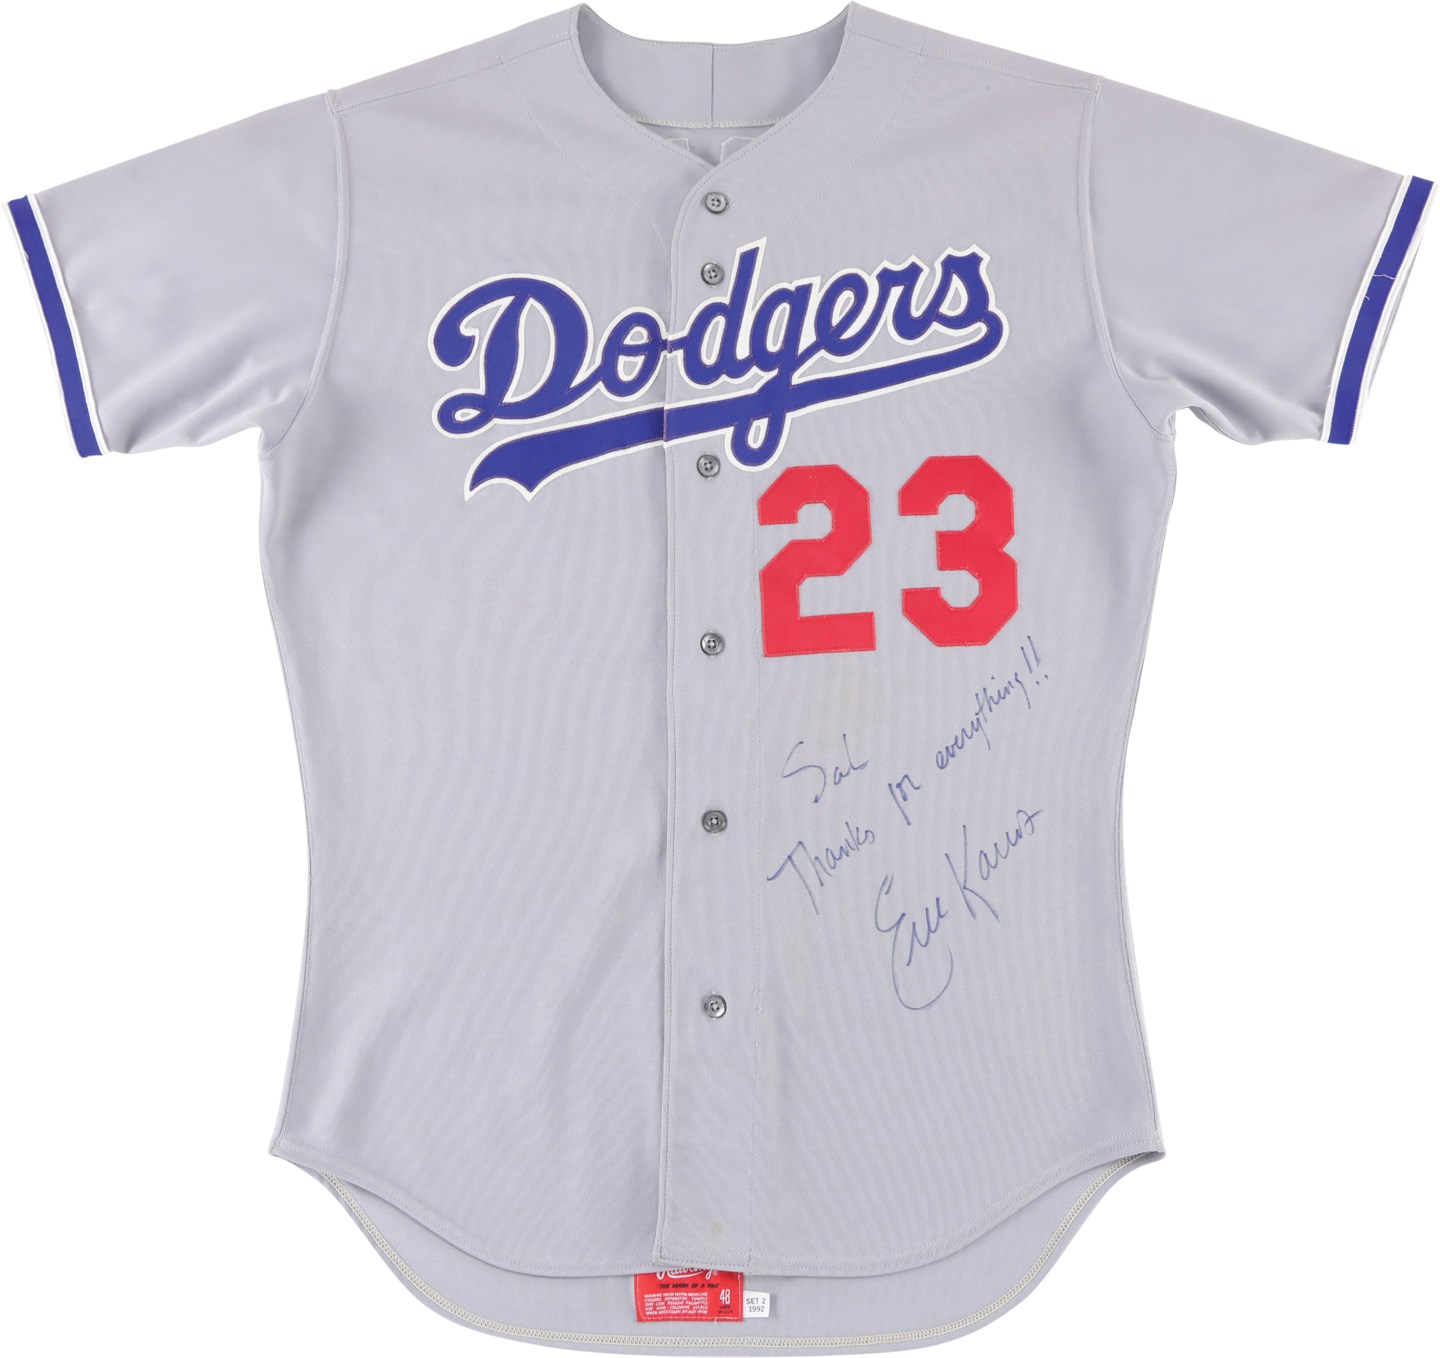 Baseball Equipment - 1992 Eric Karros Rookie of the Year Los Angeles Dodgers Game Worn Jersey - Signed to Sal LaRocca